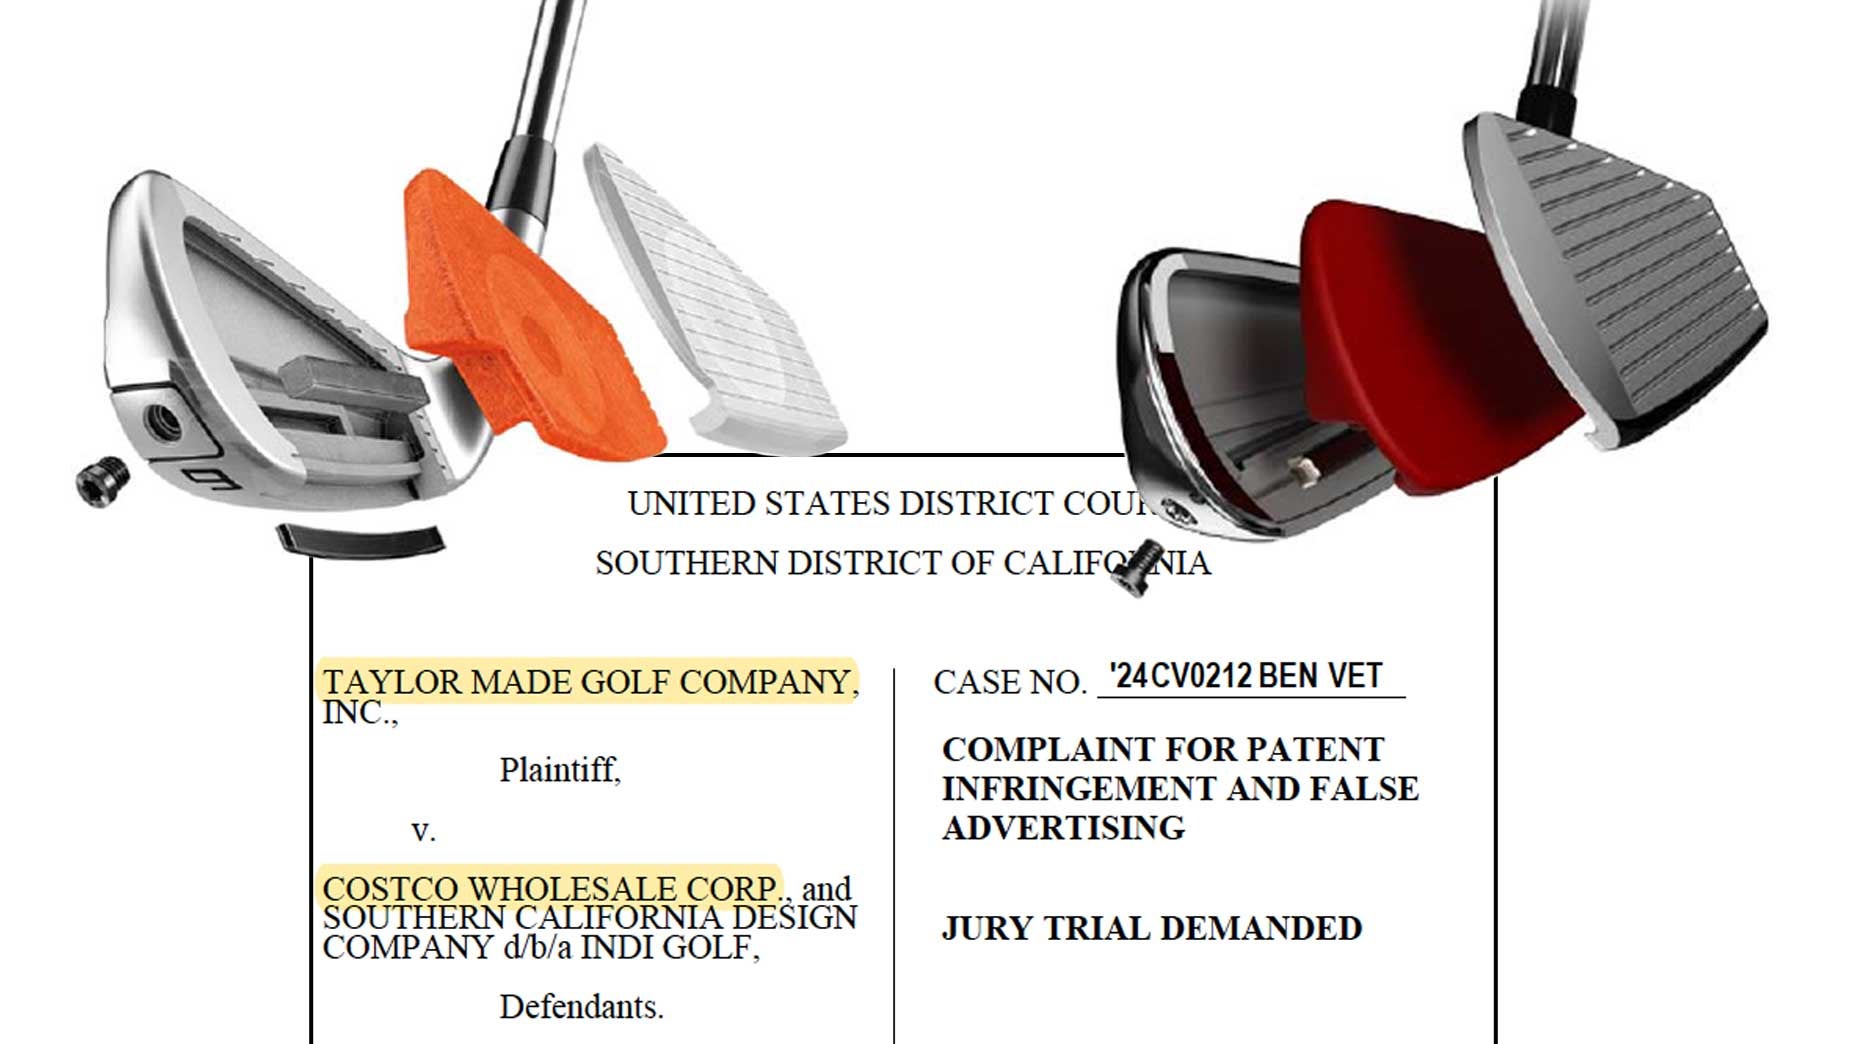 TaylorMade Costco lawsuit